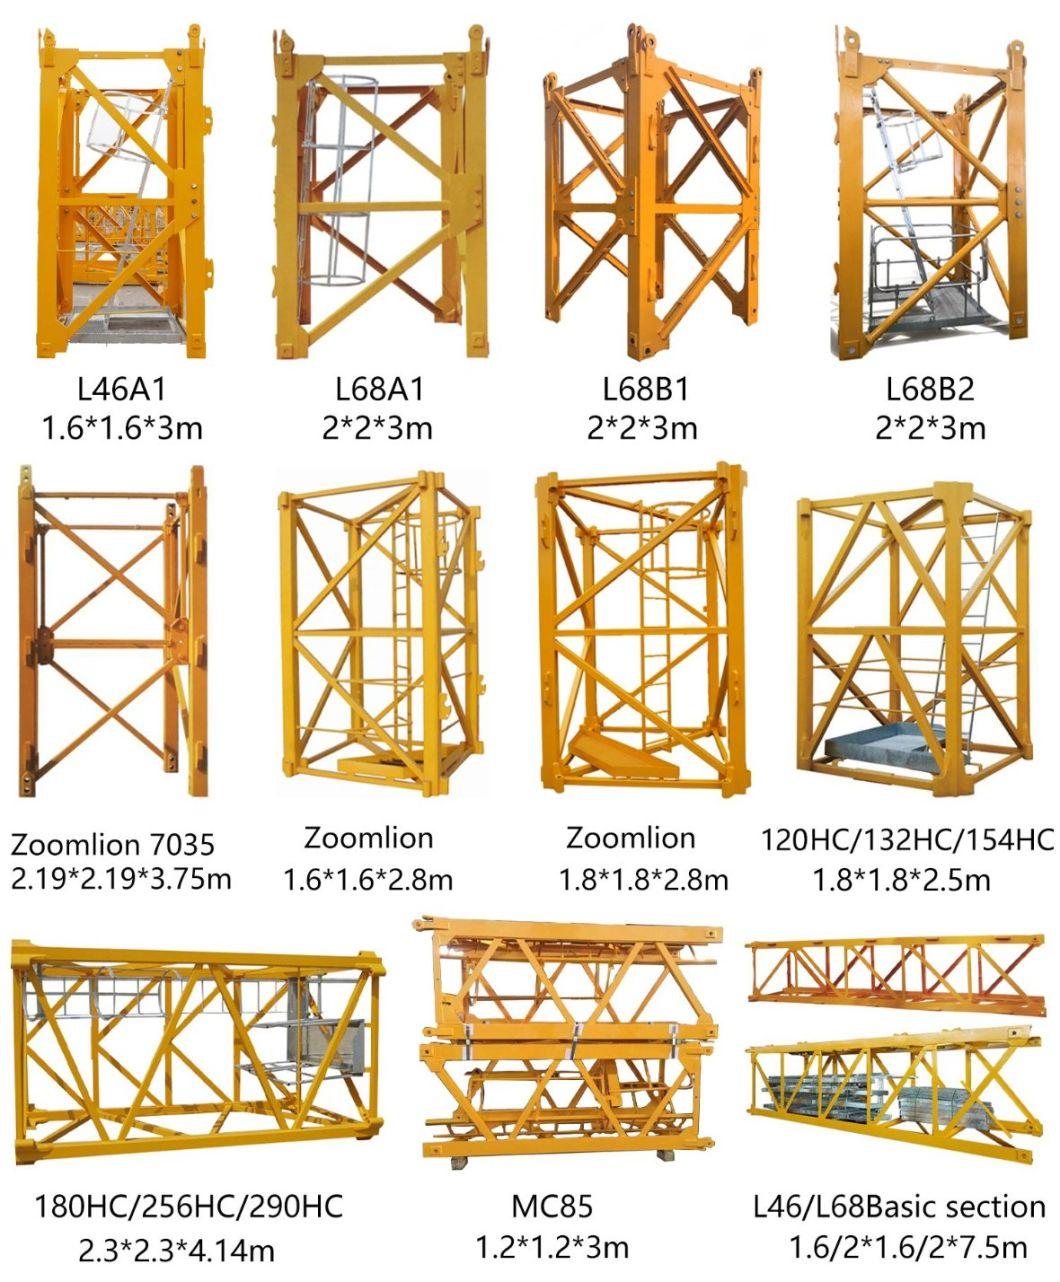 L68b2 Mast Section for Tower Crane Include Platform and Ladder